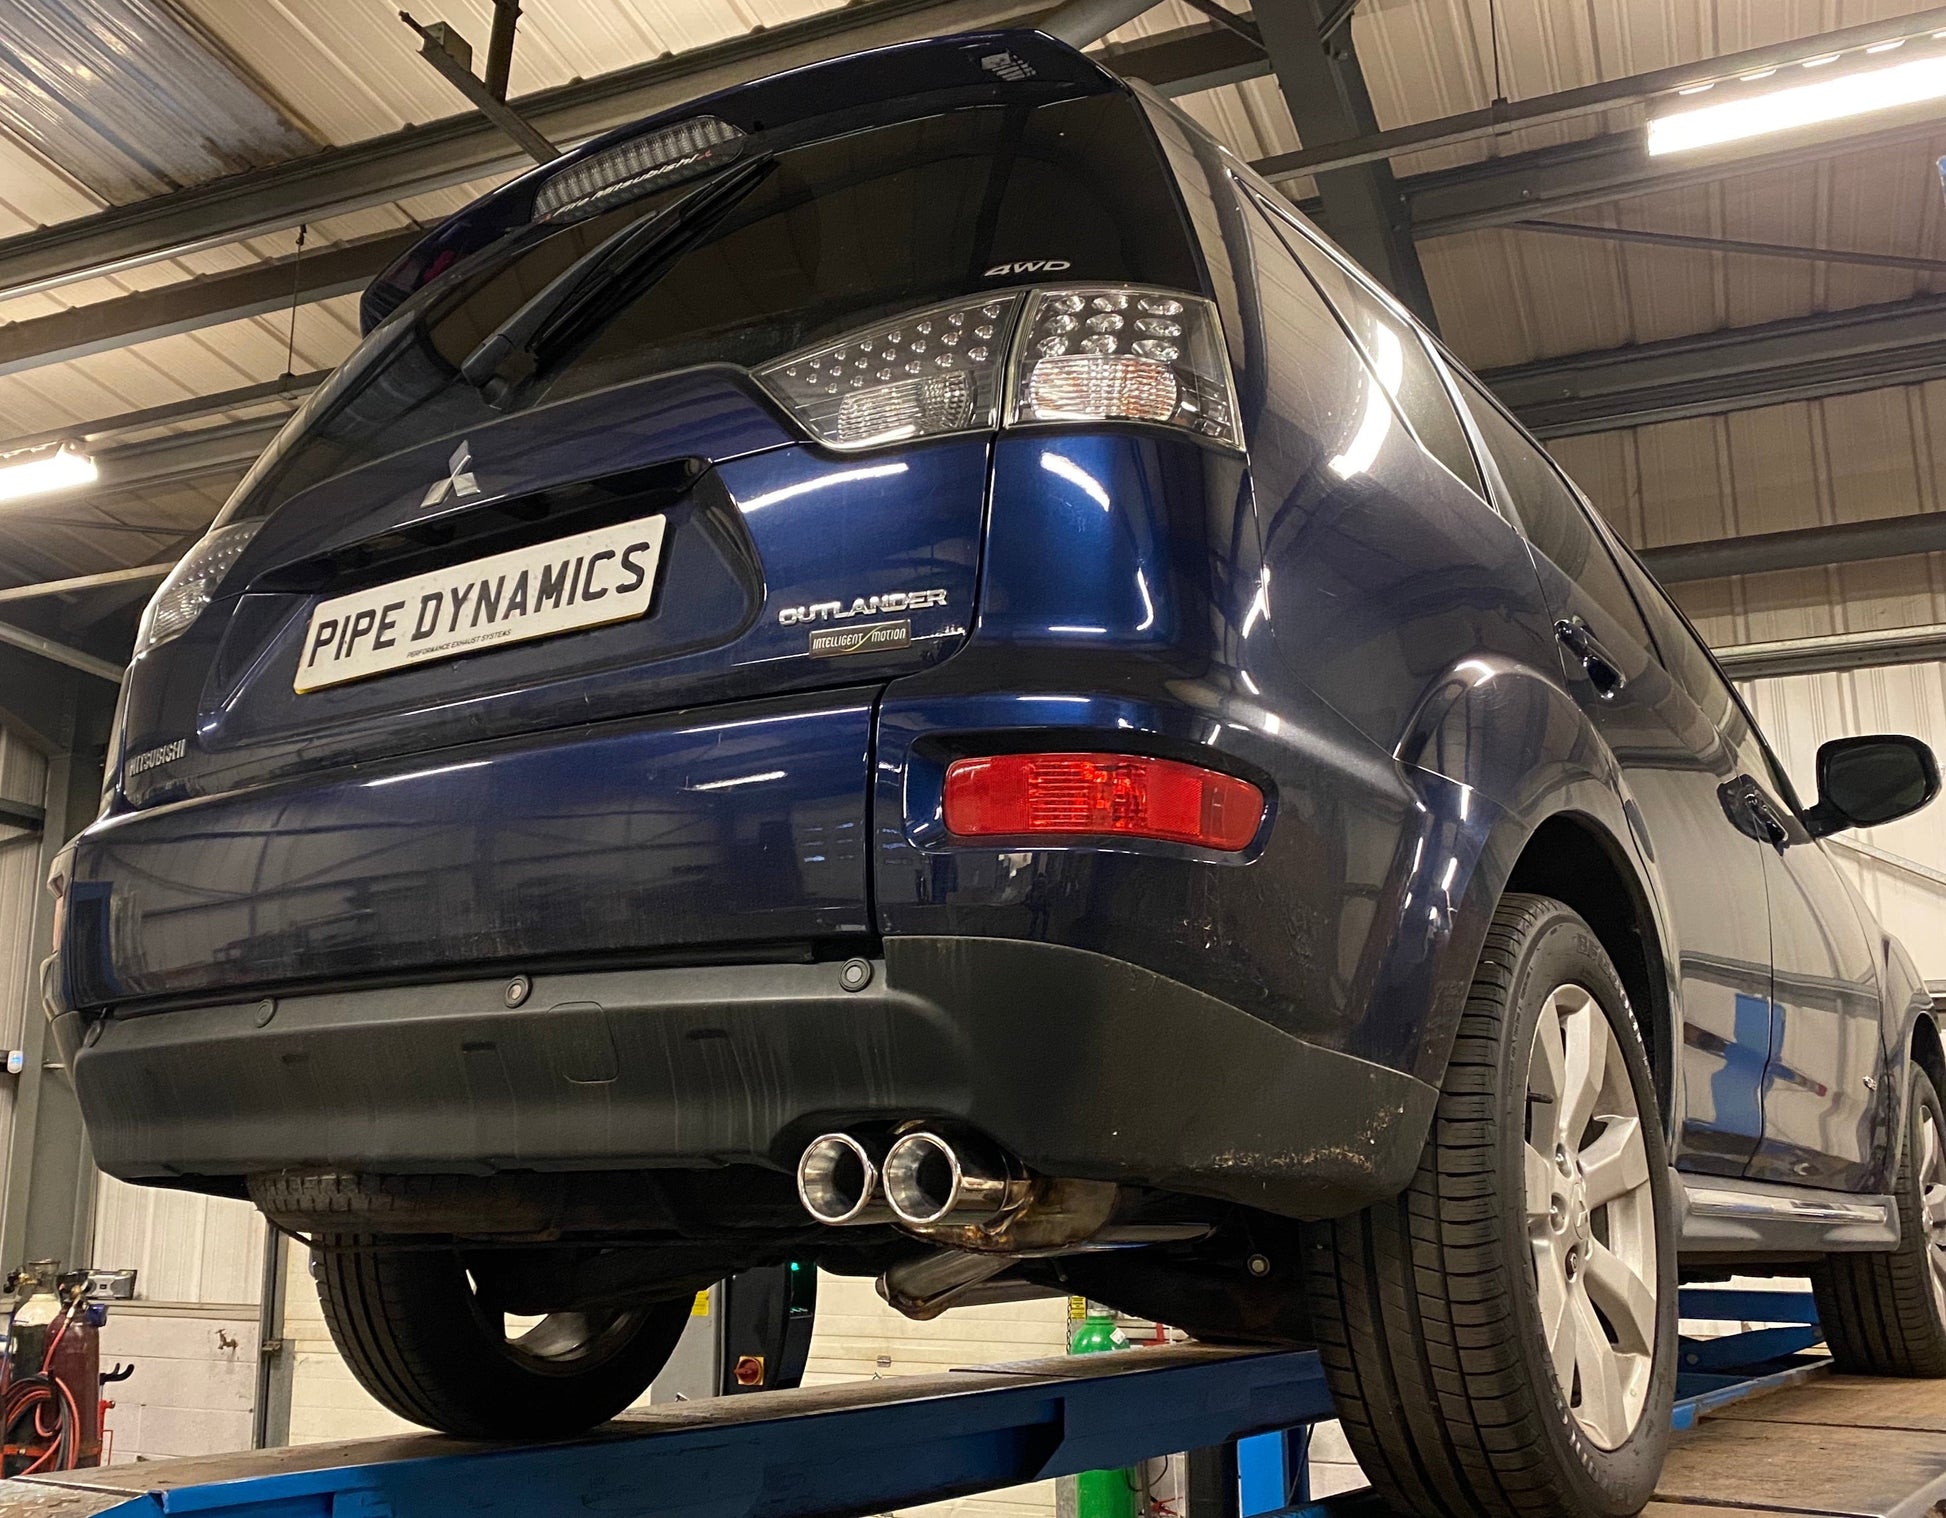 Mitsubishi Outlander 2.3 DI-D 2010-2013 175bhp 4WD  - Replacement exhaust from DPF back (middle and Rear) - Pipe Dynamics